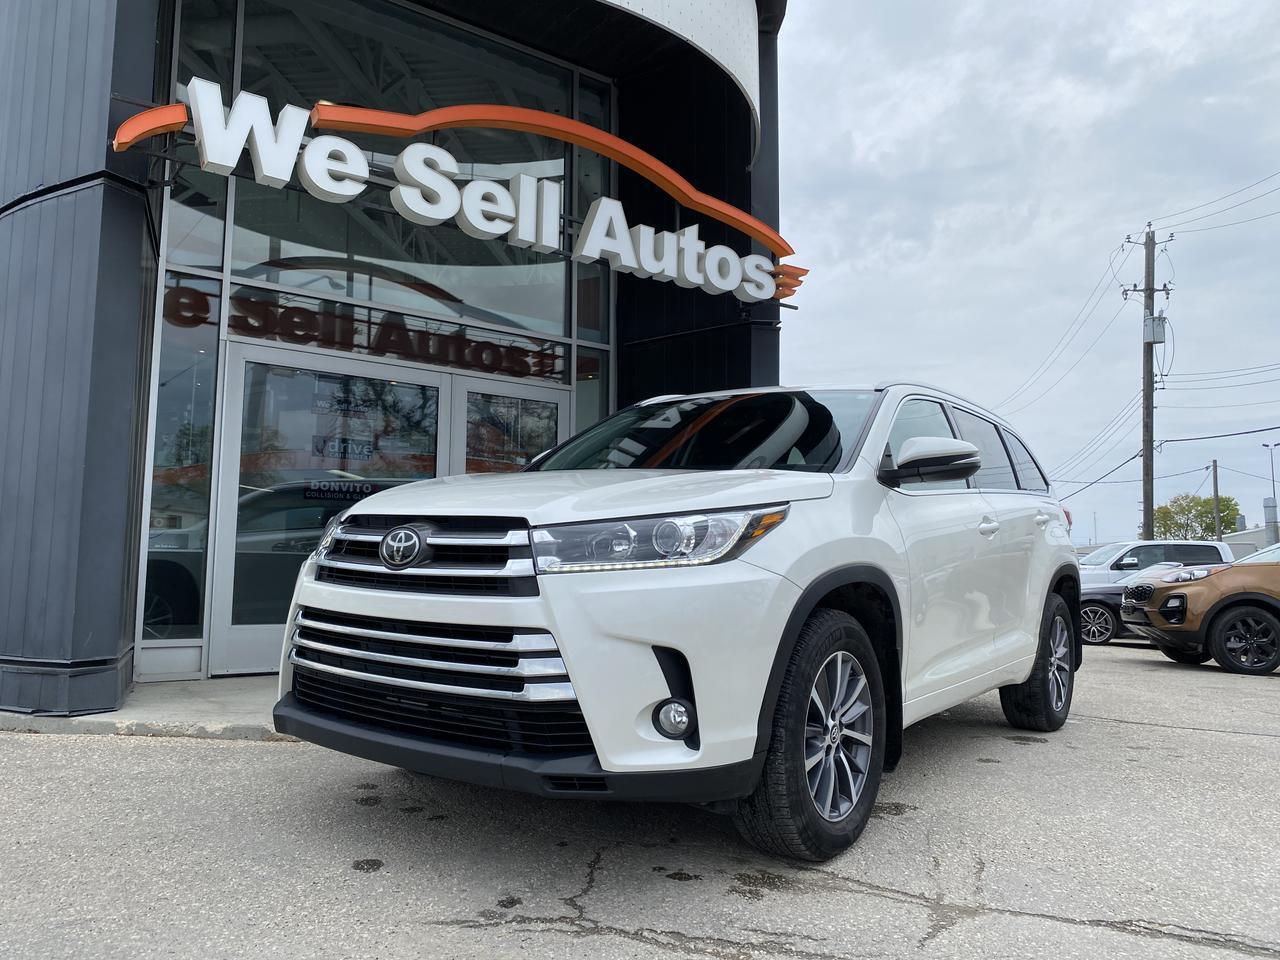 2018 Toyota Highlander XLE AWD w/Power Sunroof, 3rd Row Seating, & More!